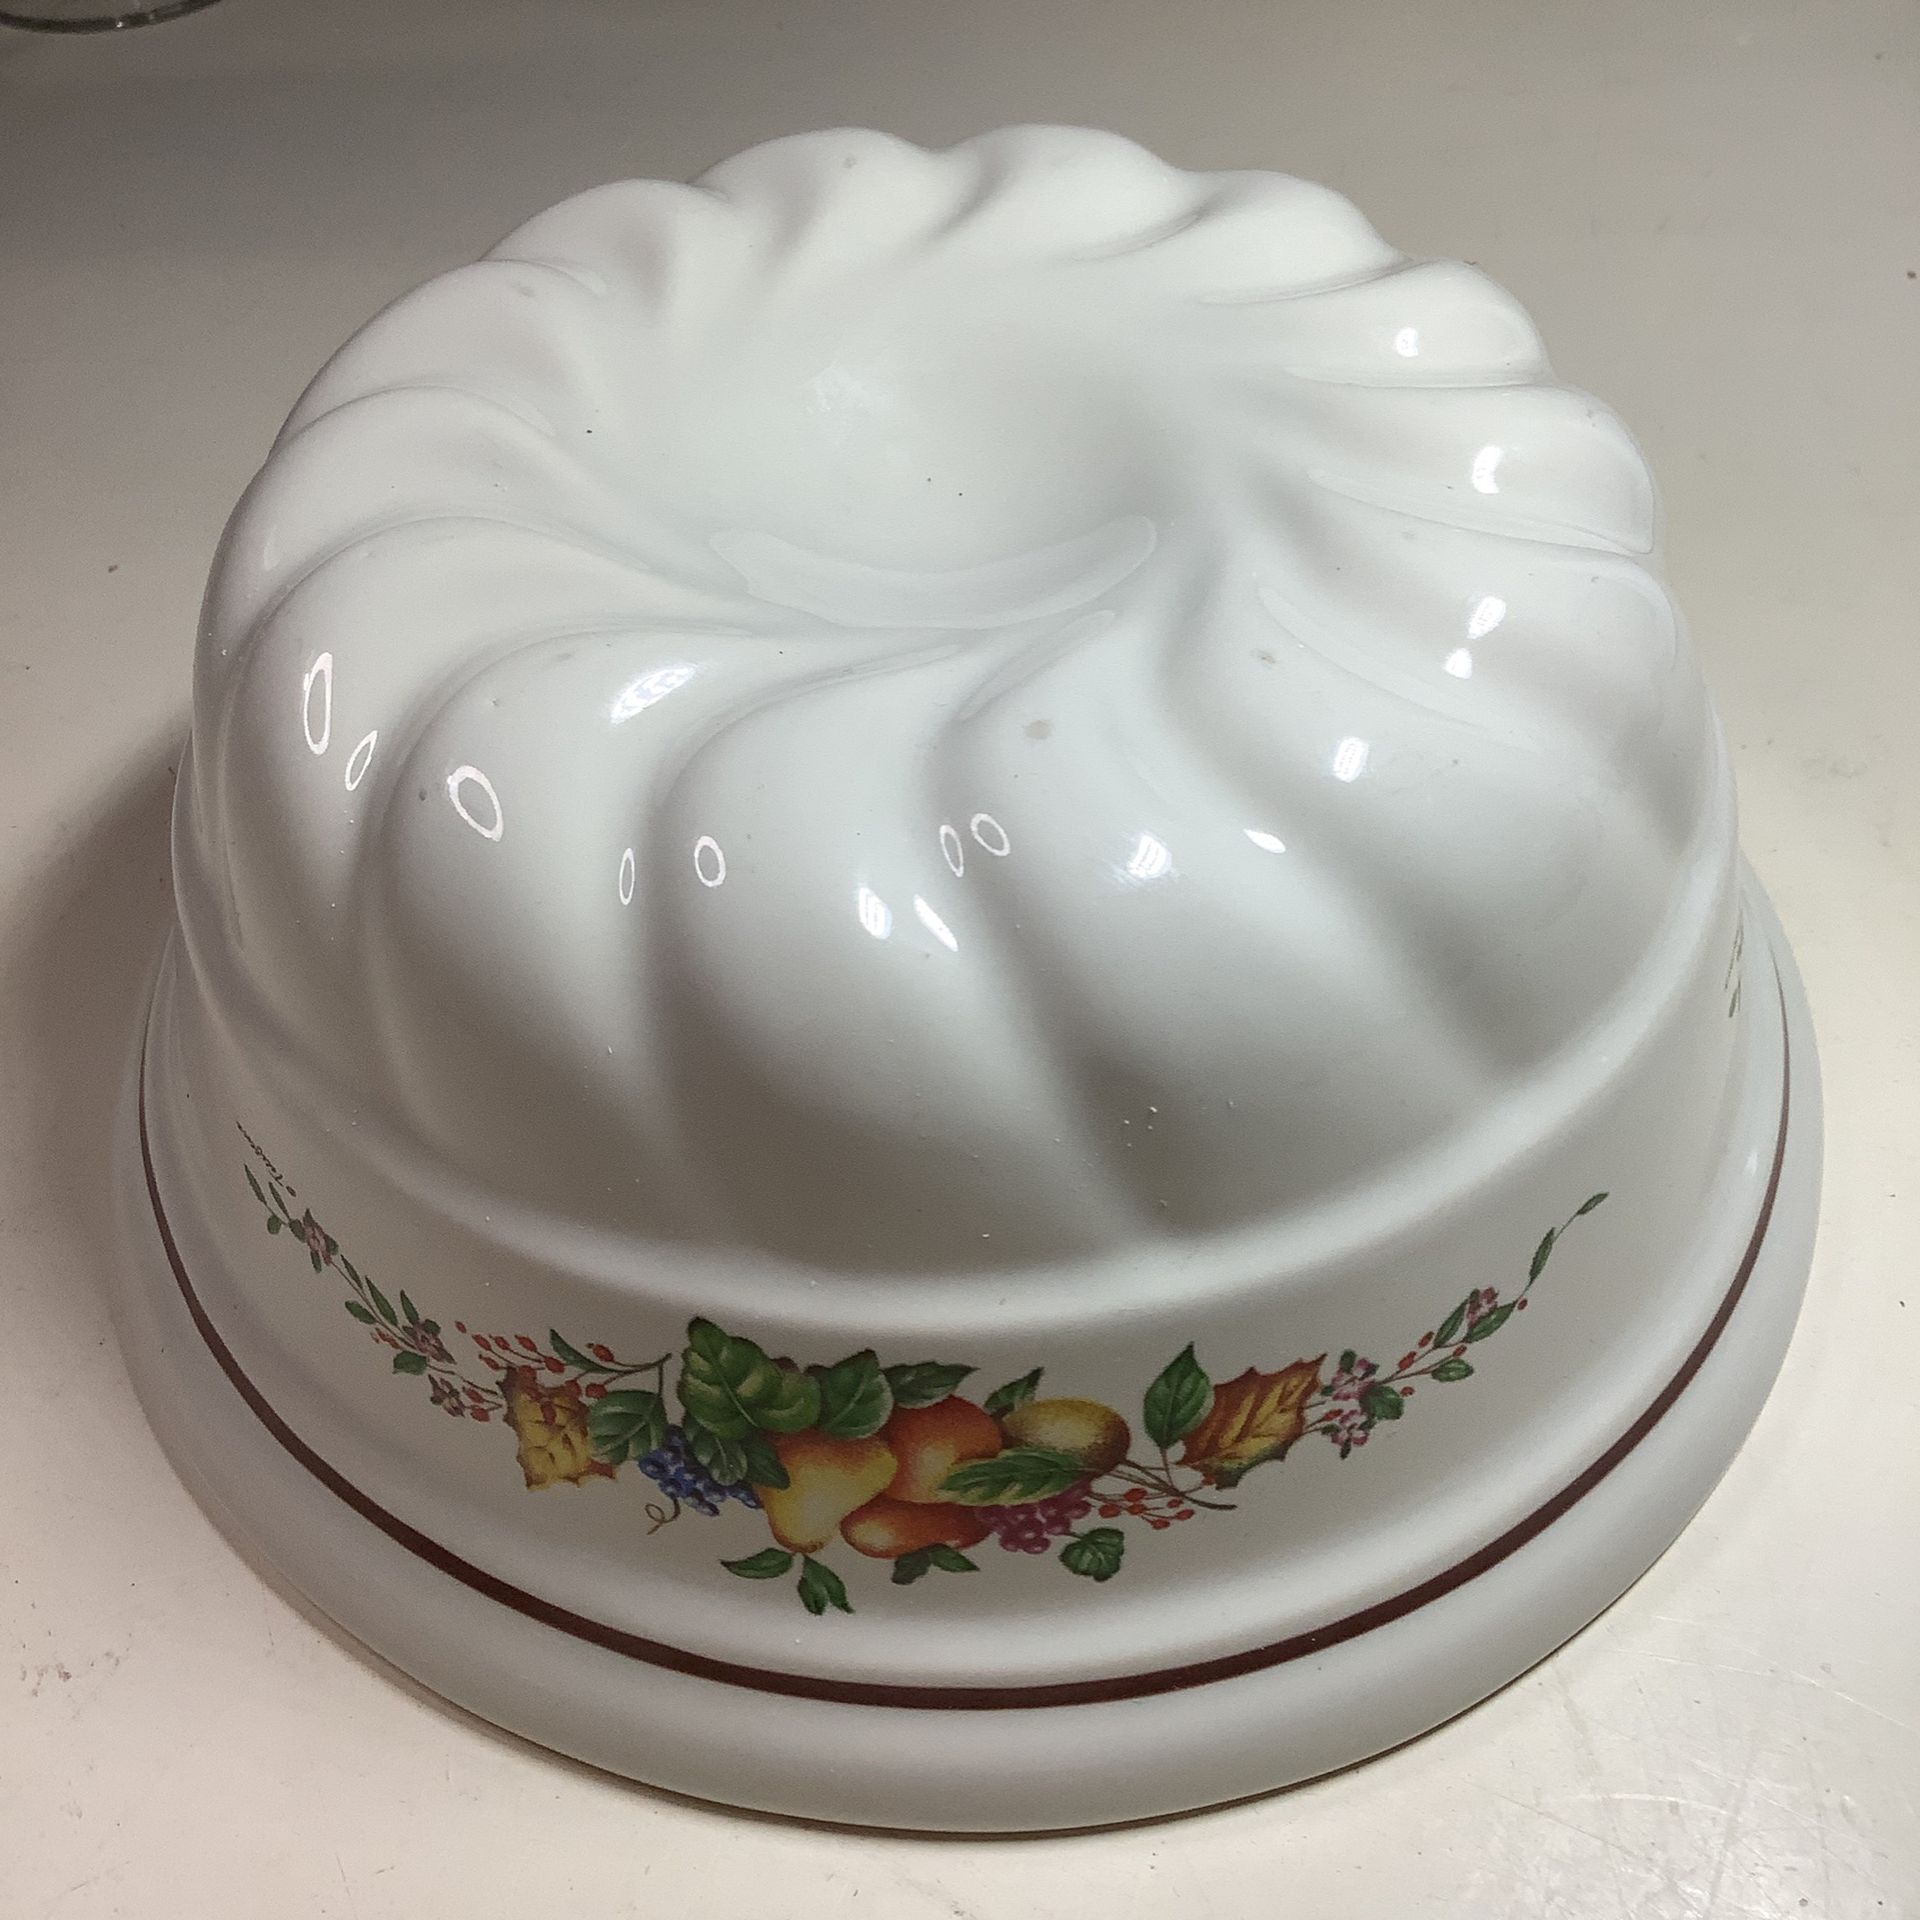 Jello Mold Ceramic Two Available At $5 Each